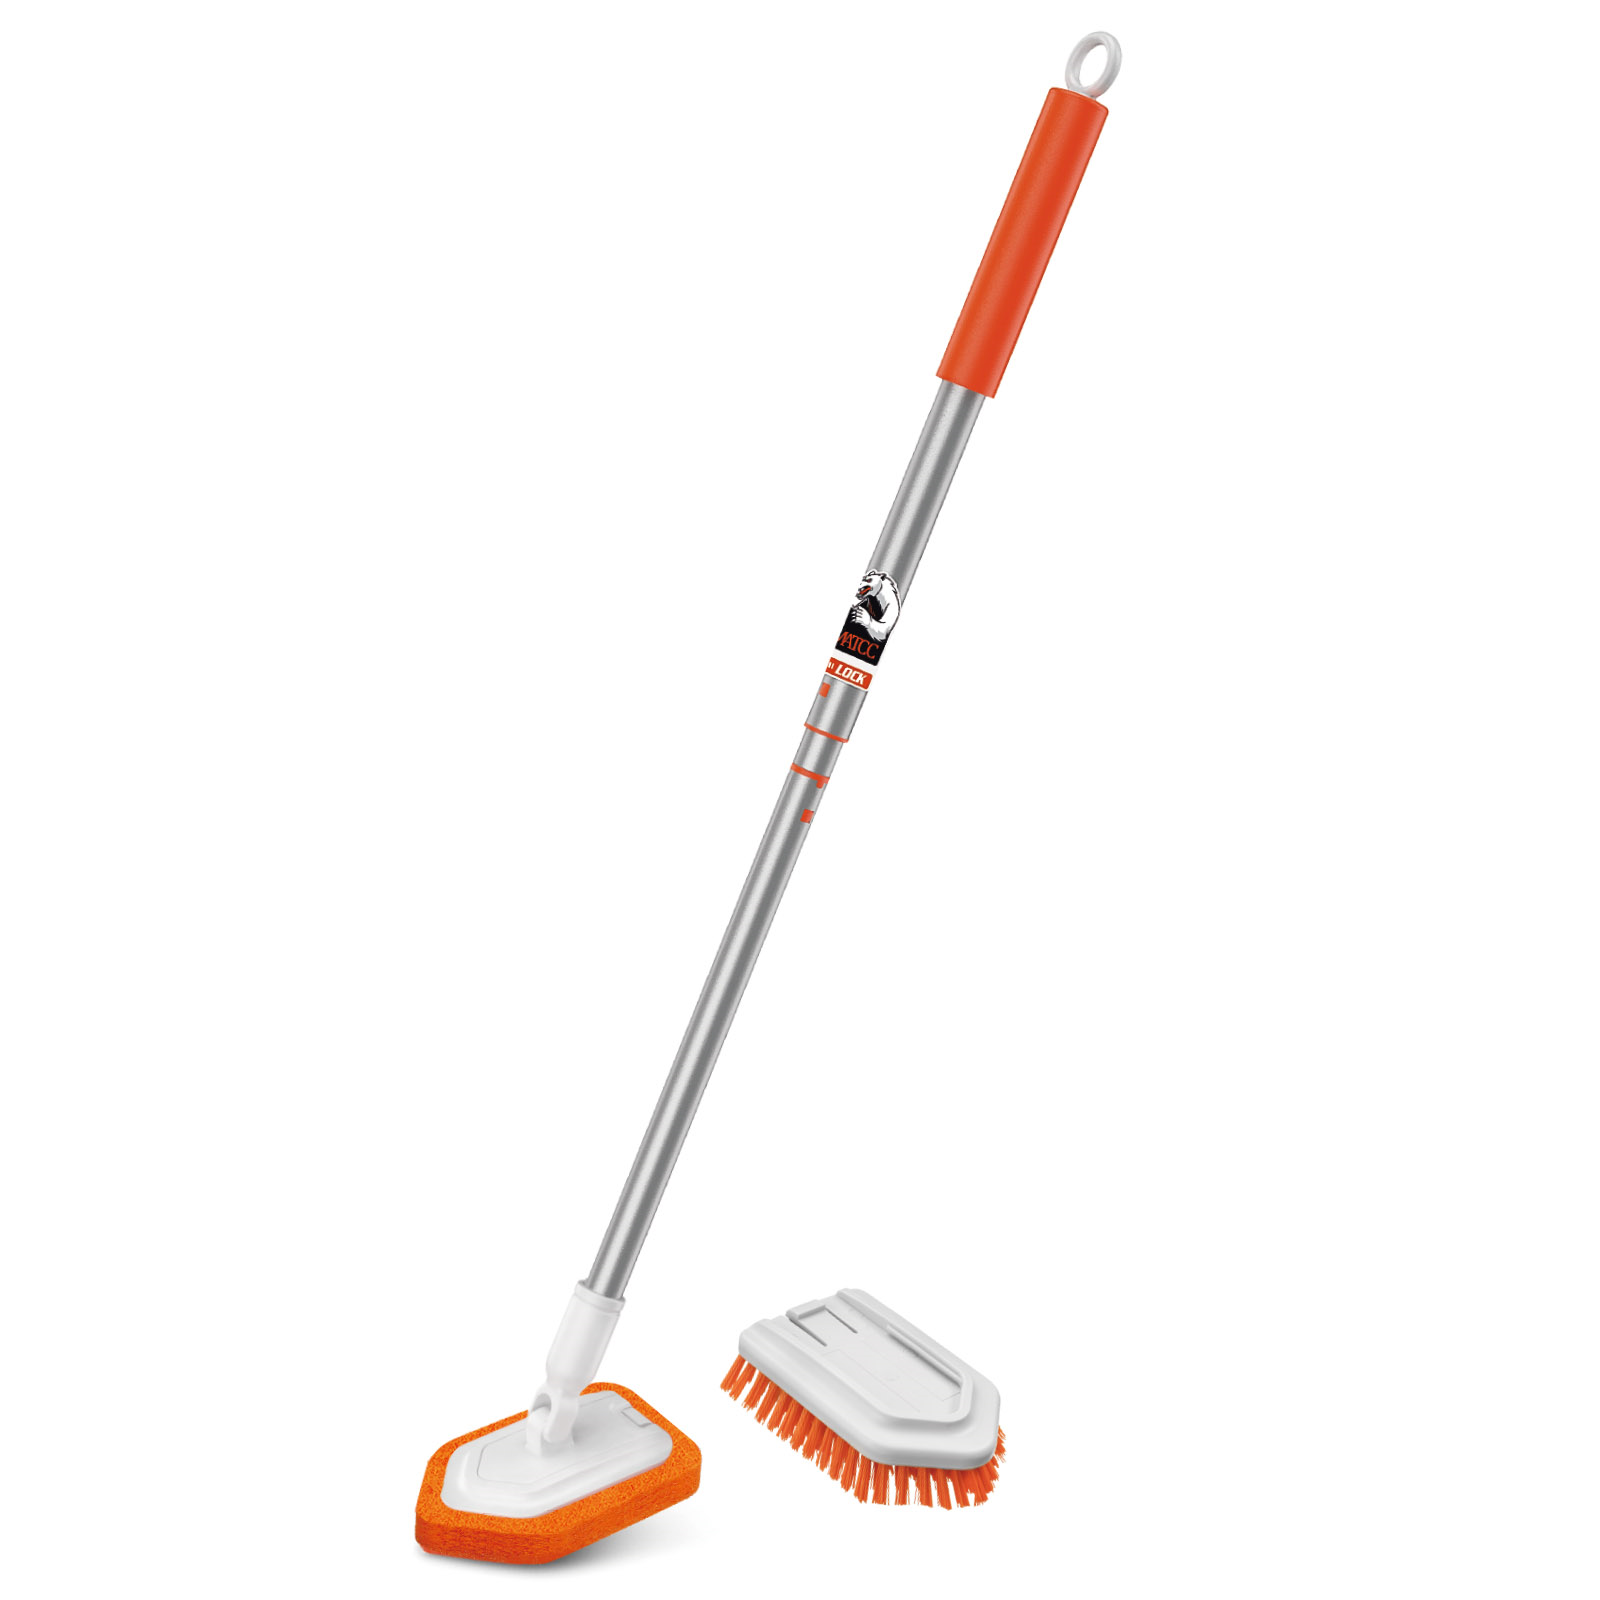 MATCC Extendable Tub/Tile Scrubber Brush Combo Set with 42'' Long Handle Cleaning Tool